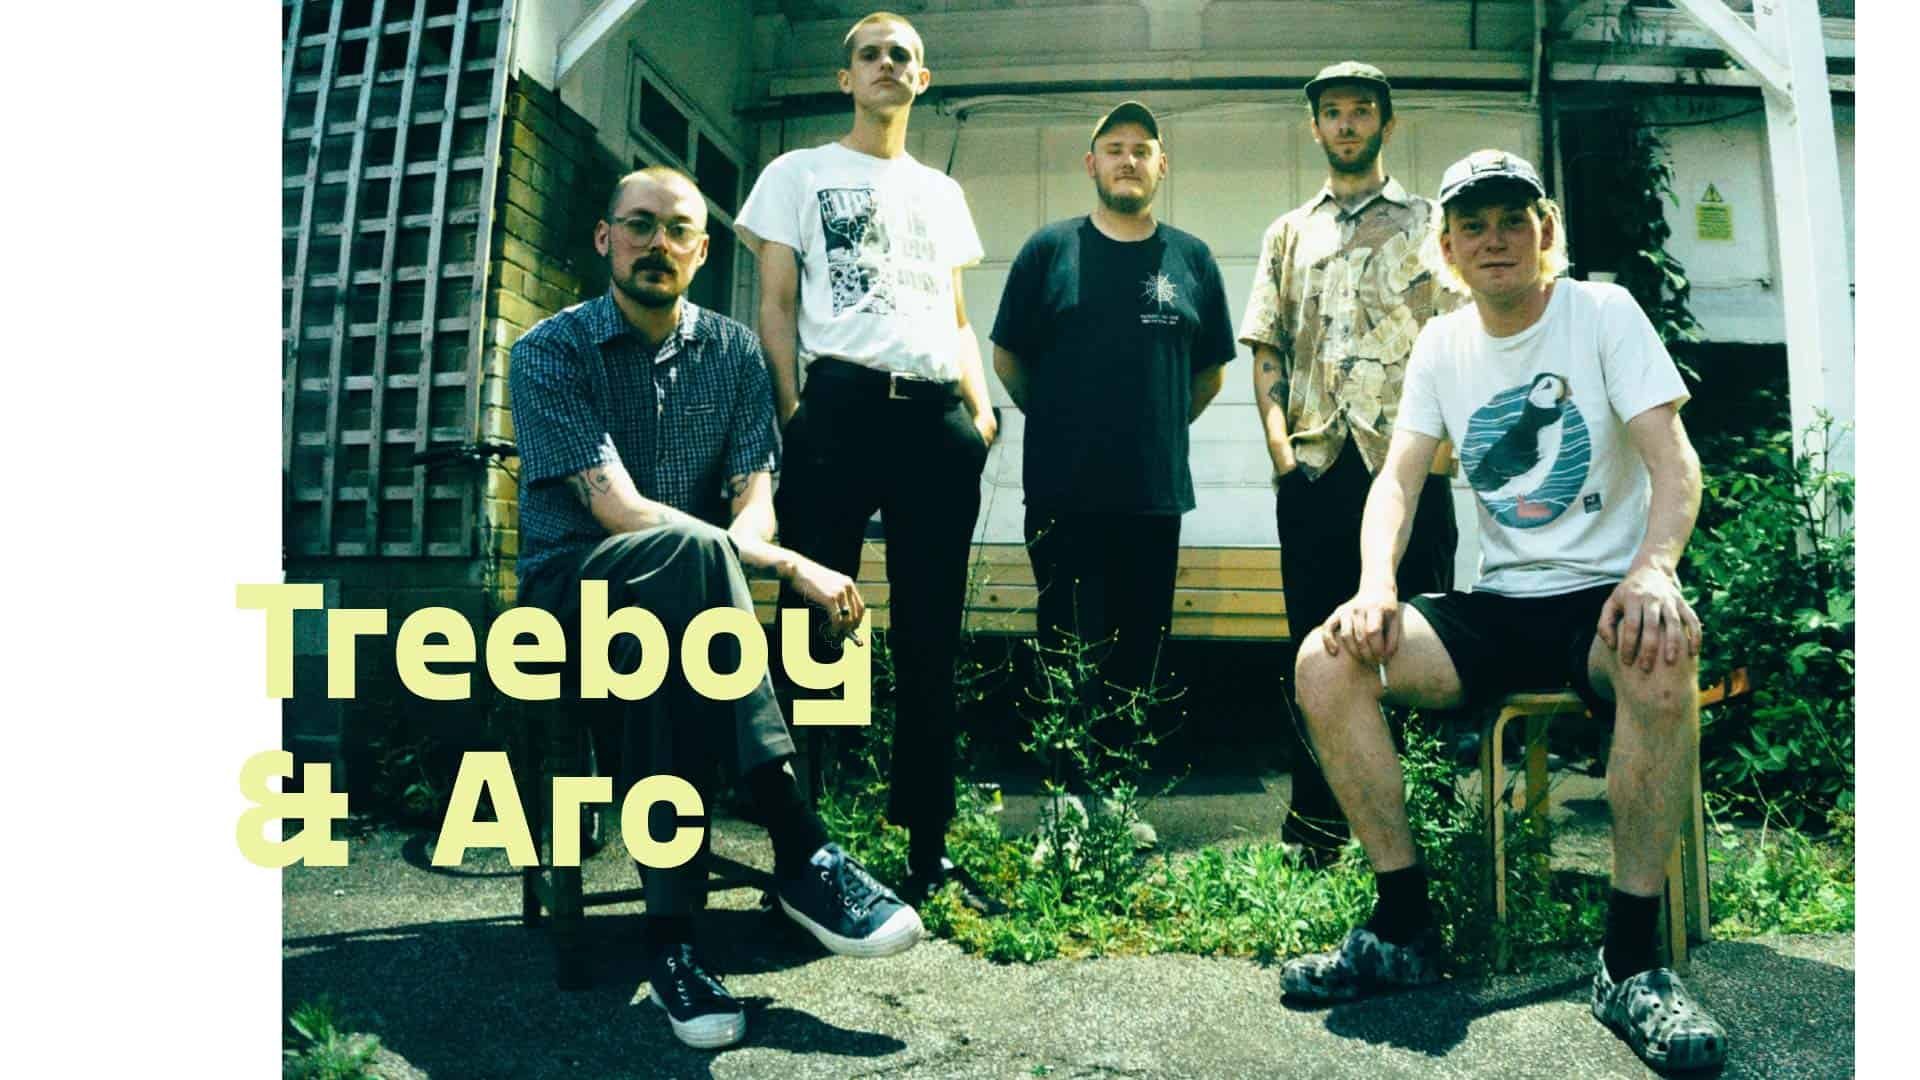 A photo of the band Treeboy & Arc